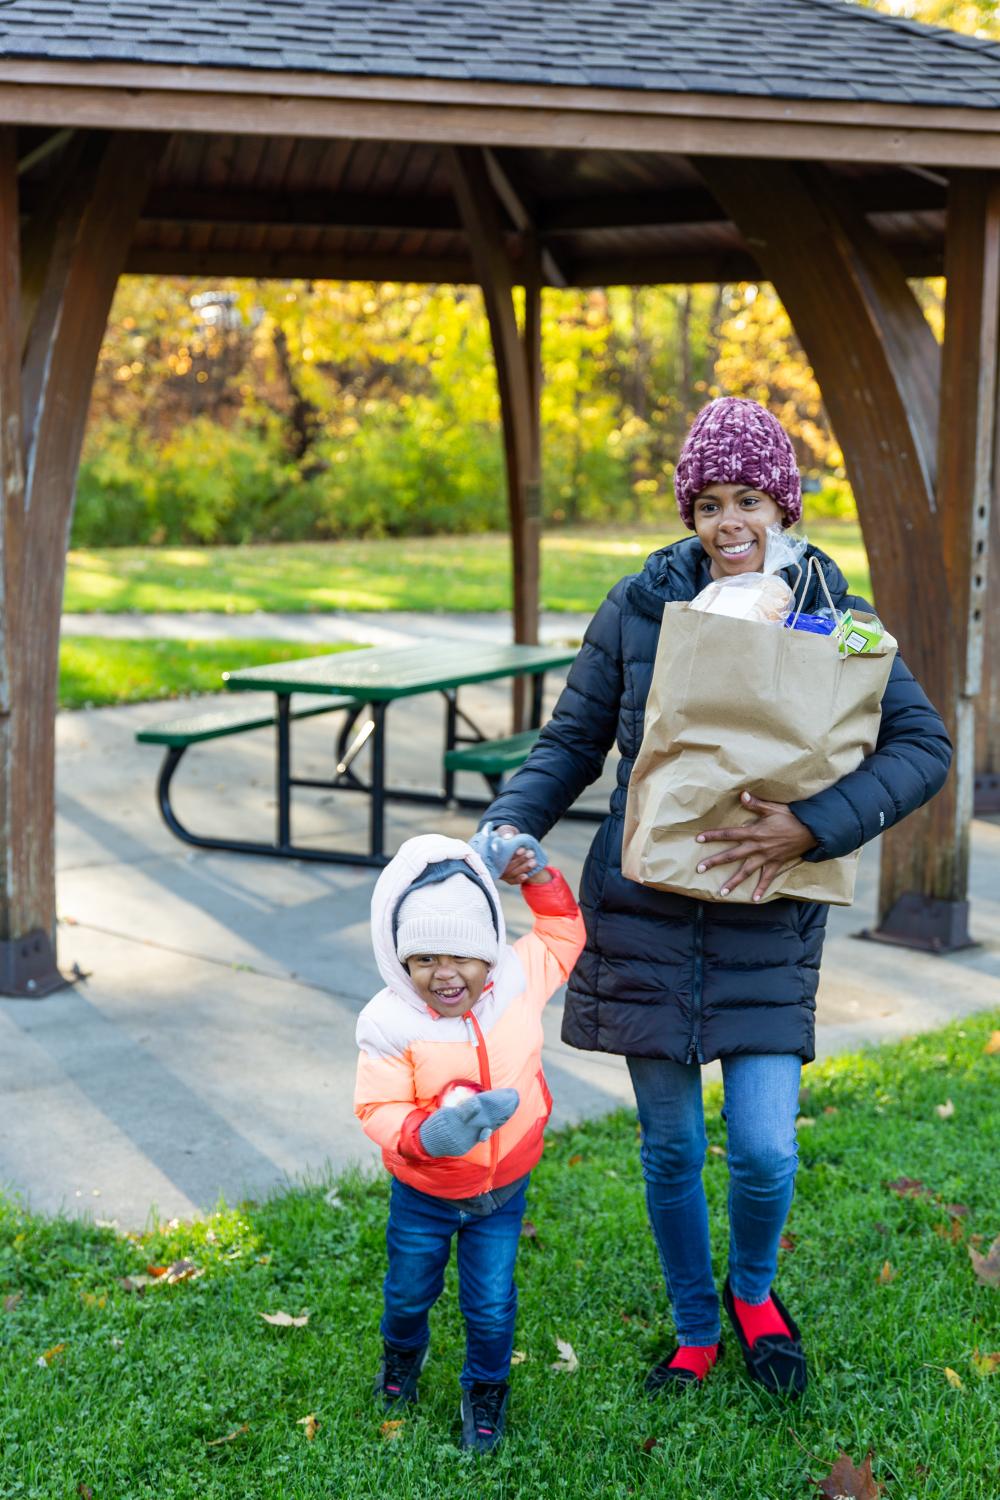 A mother and child walk through a park carrying groceries